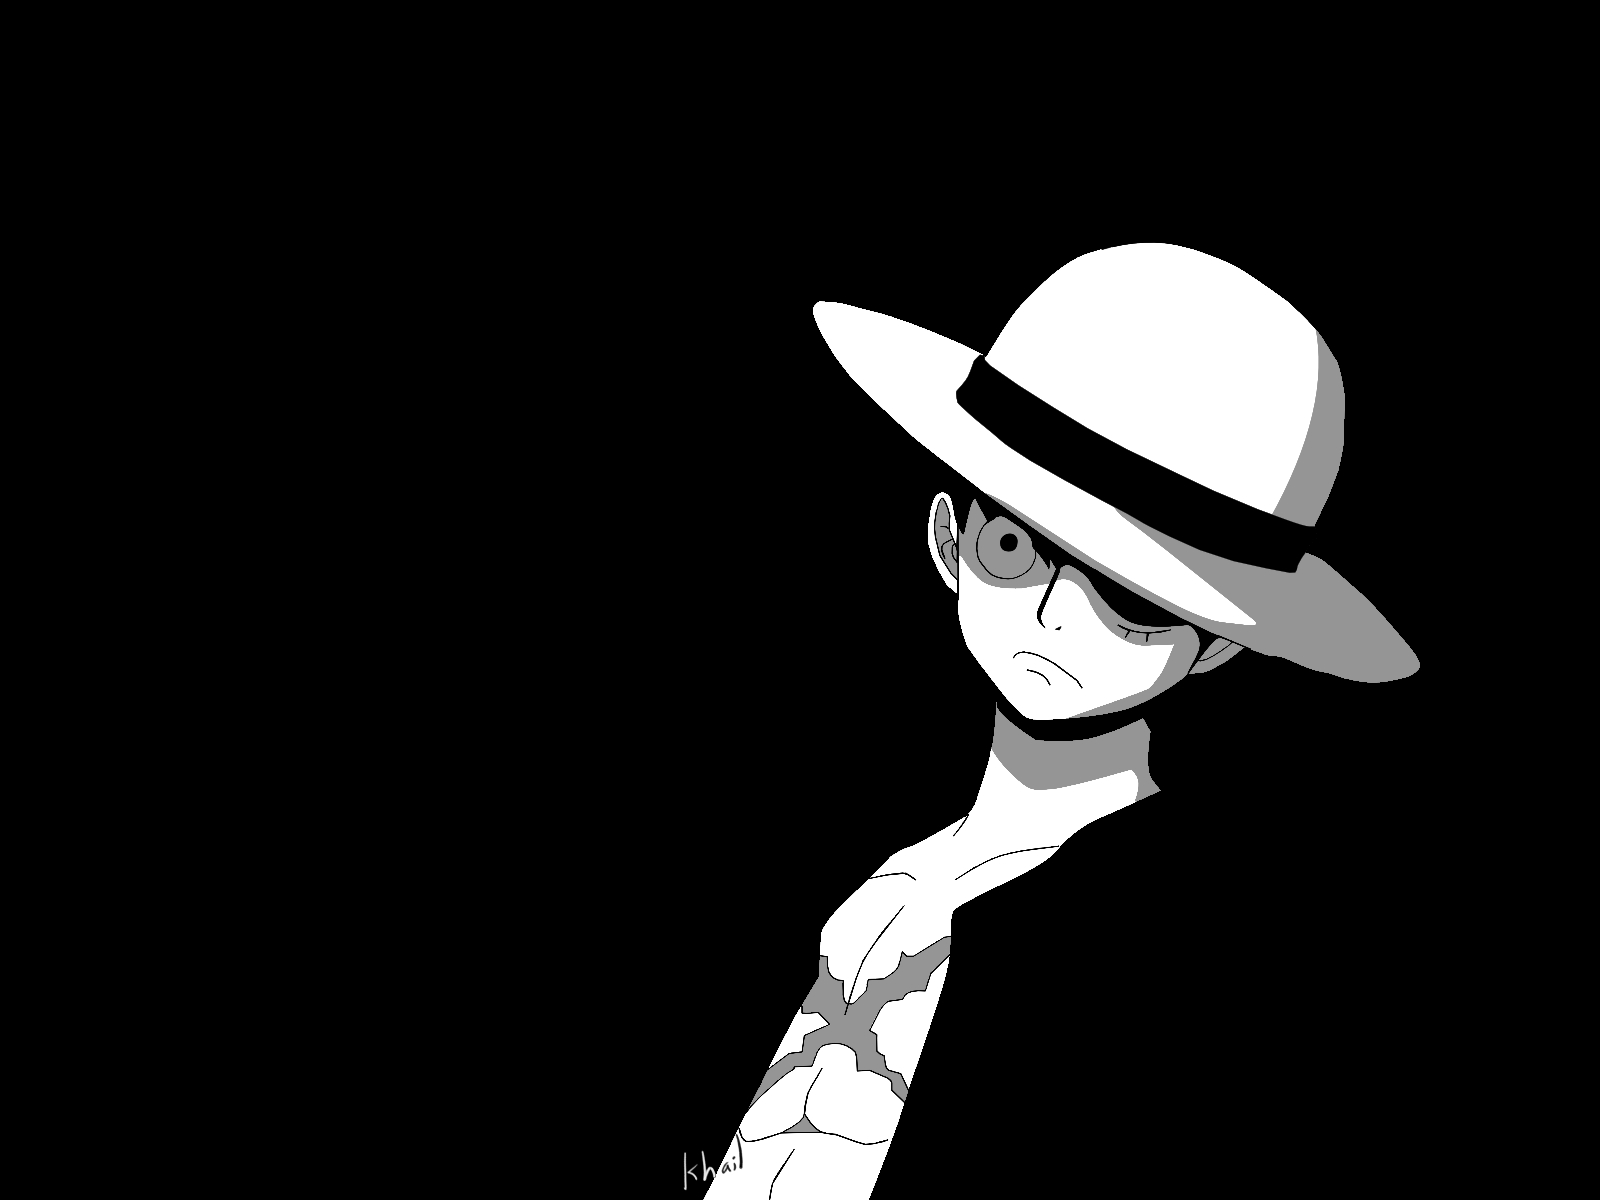 Marvelous Luffy One Piece Wallpapers Desktop Background For 1600x1200